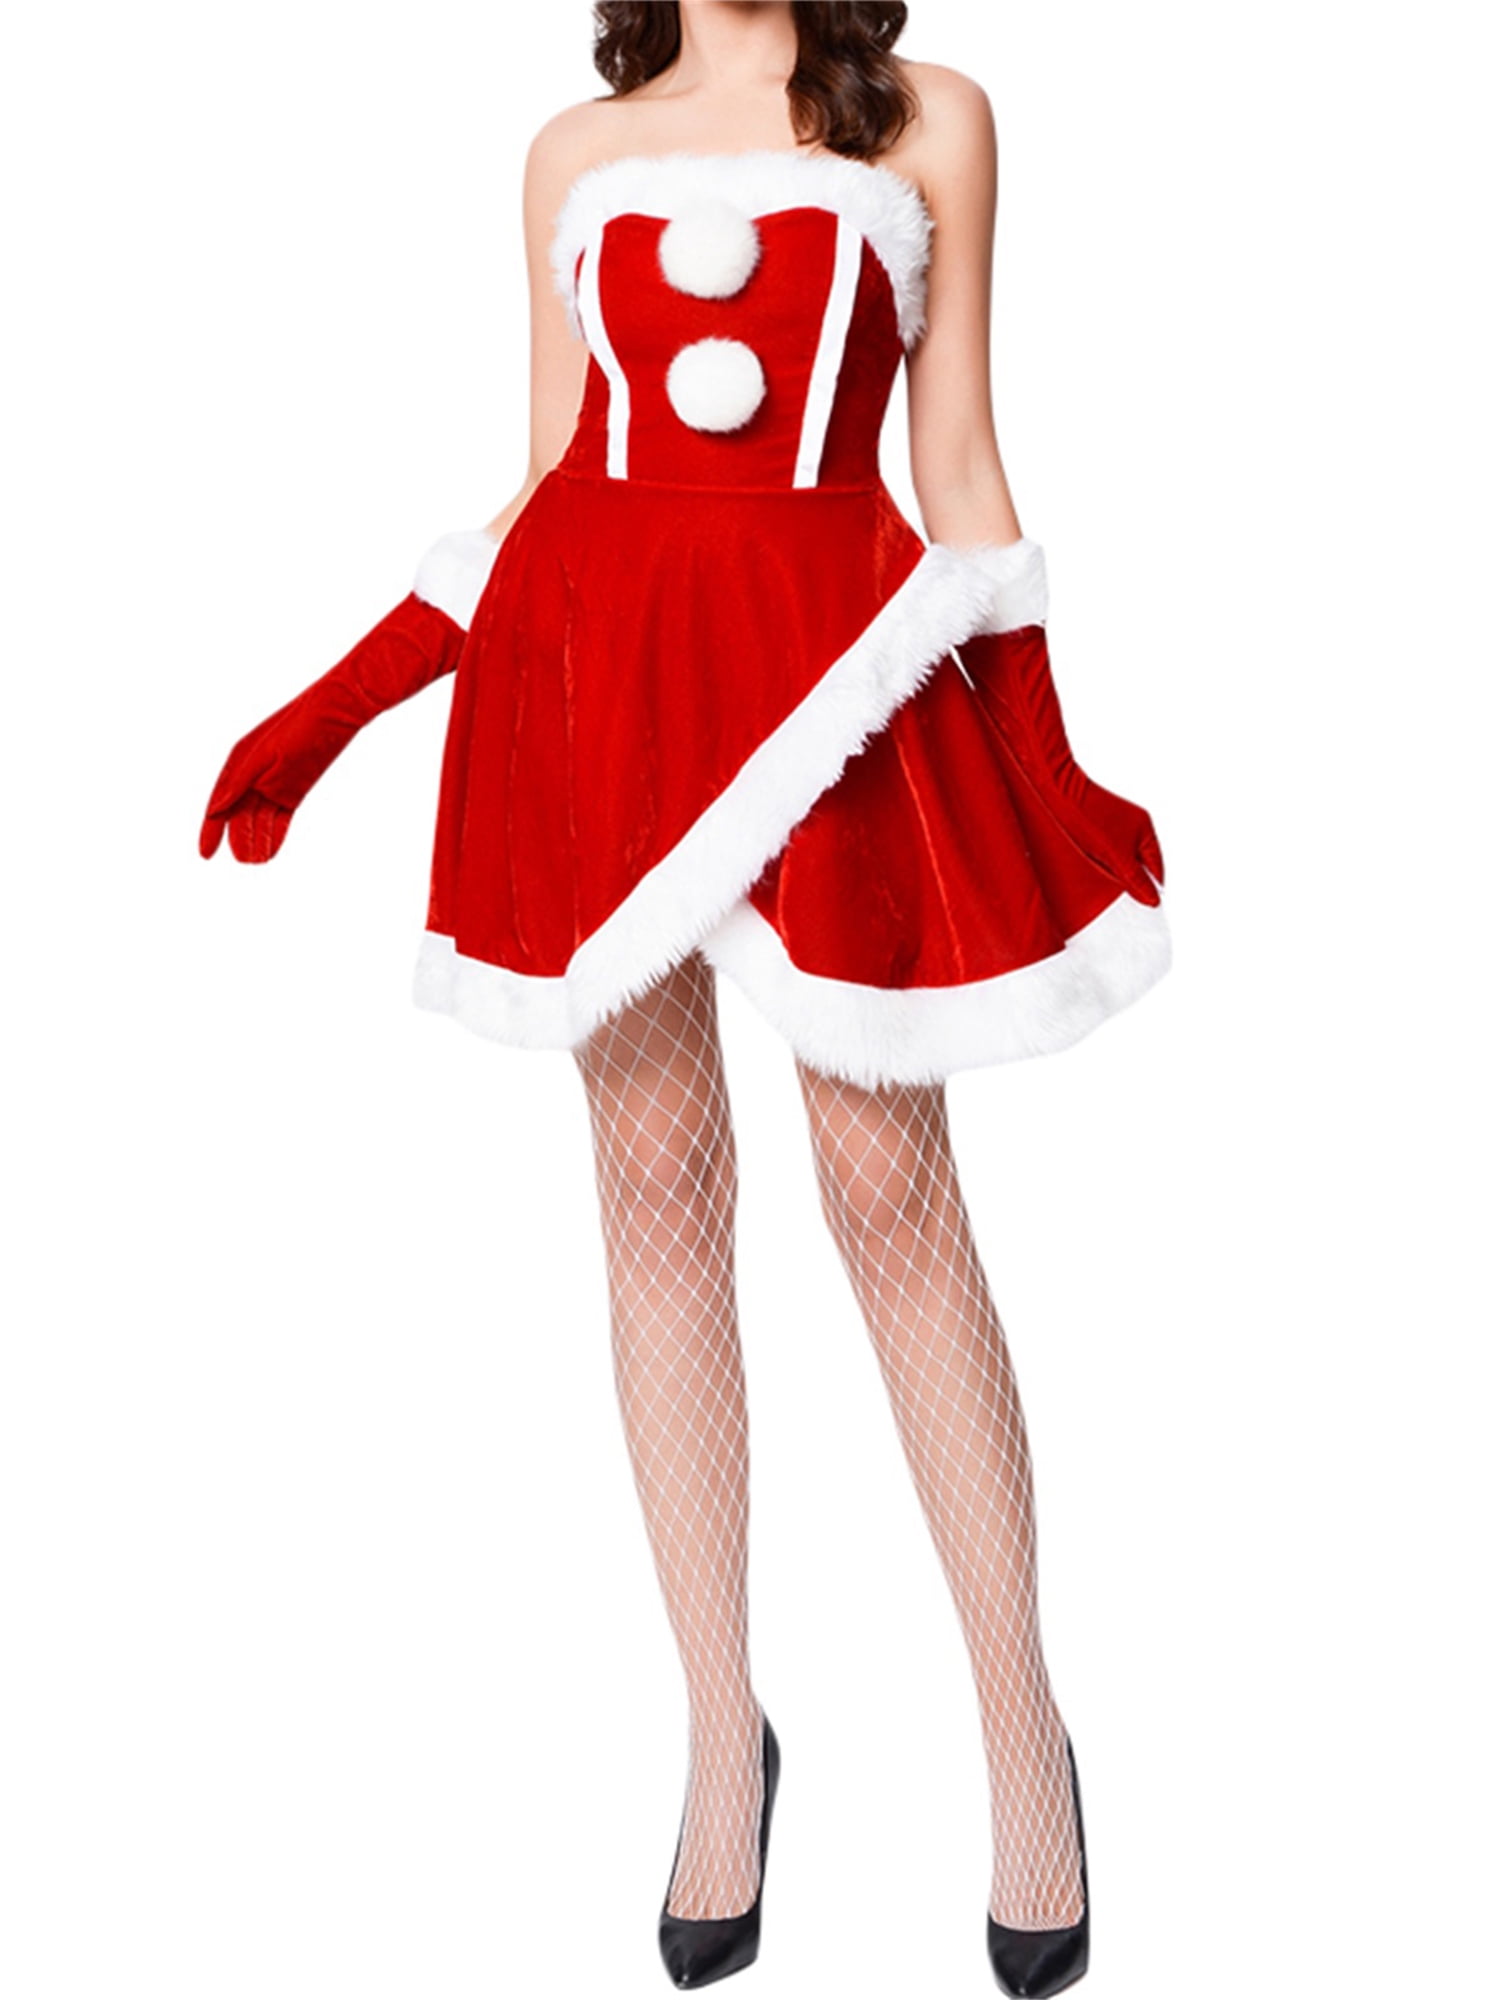 Ladies Santa Red Gloves Fancy Dress Mrs Claus Christmas Party Costume Accessory 